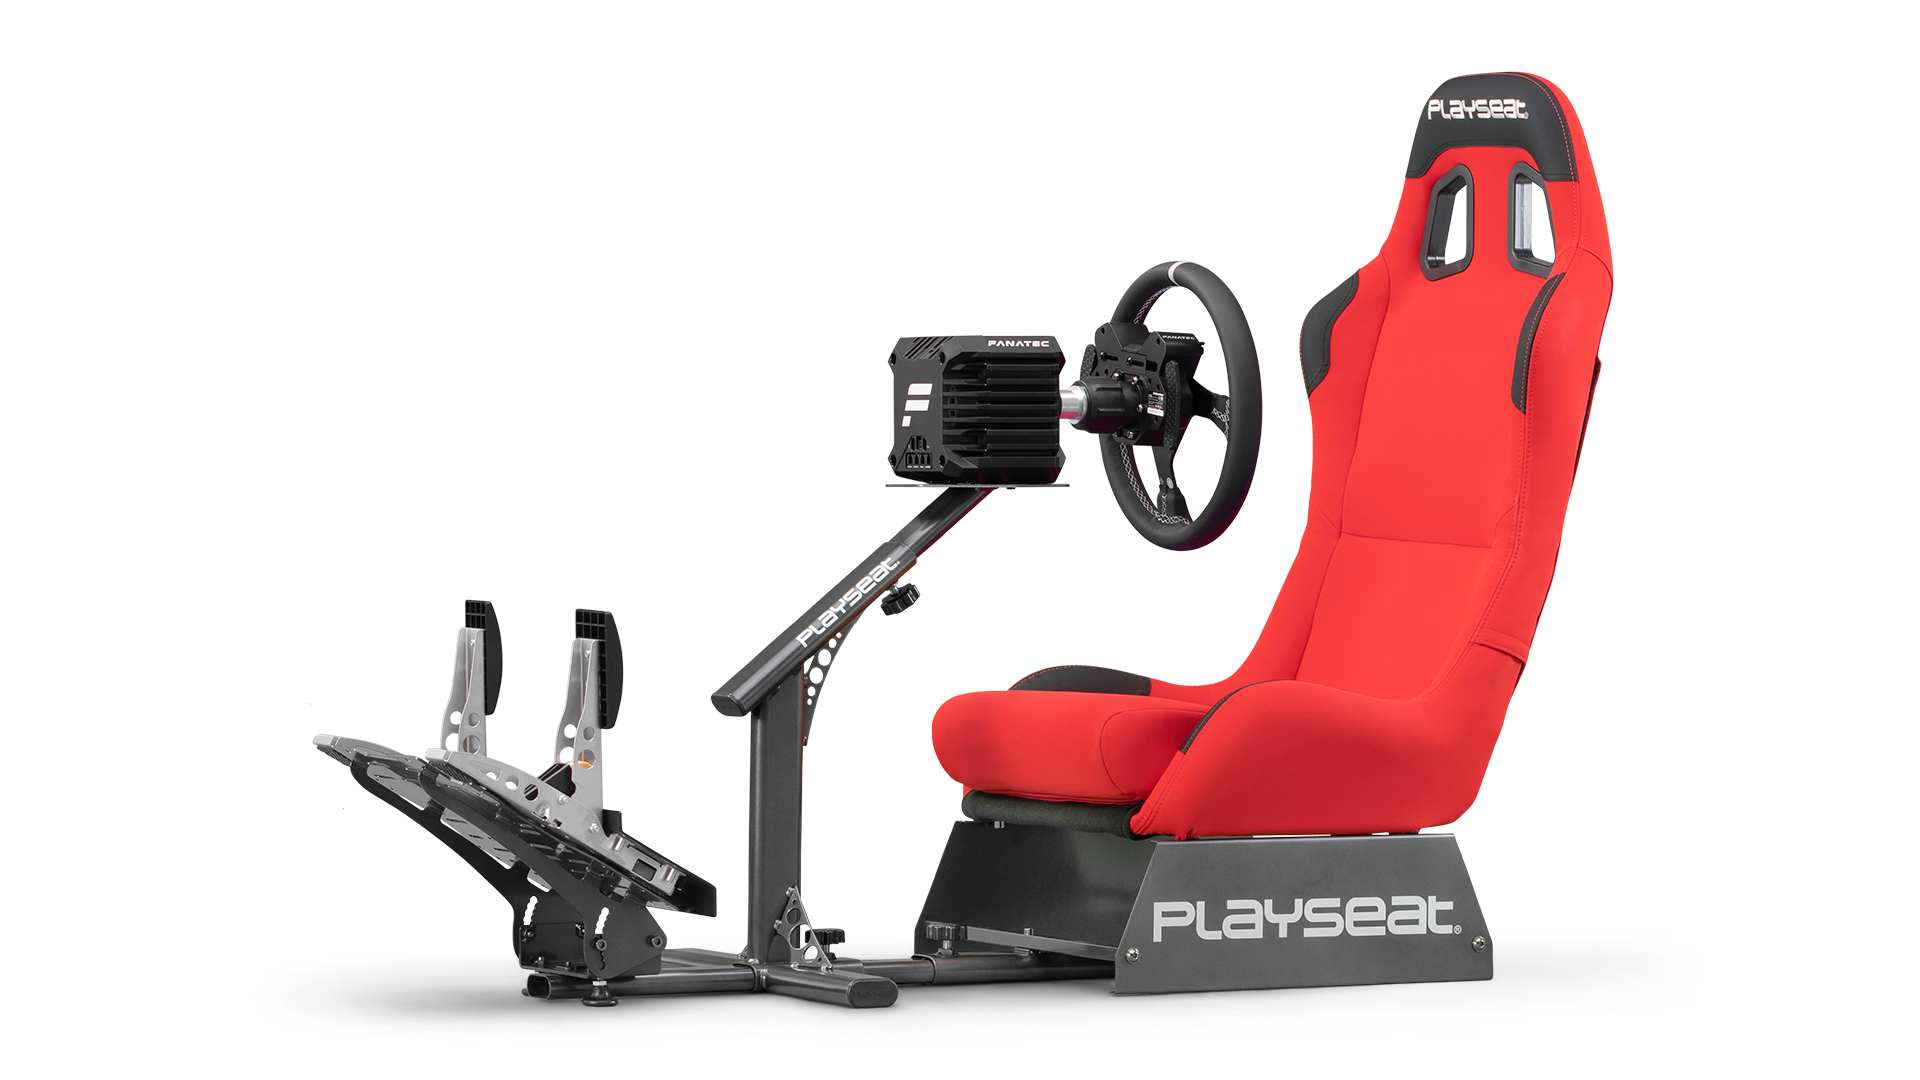 playseat-evolution-red-racing-simulator-front-angle-view-fanatec-1920x1080-1.png